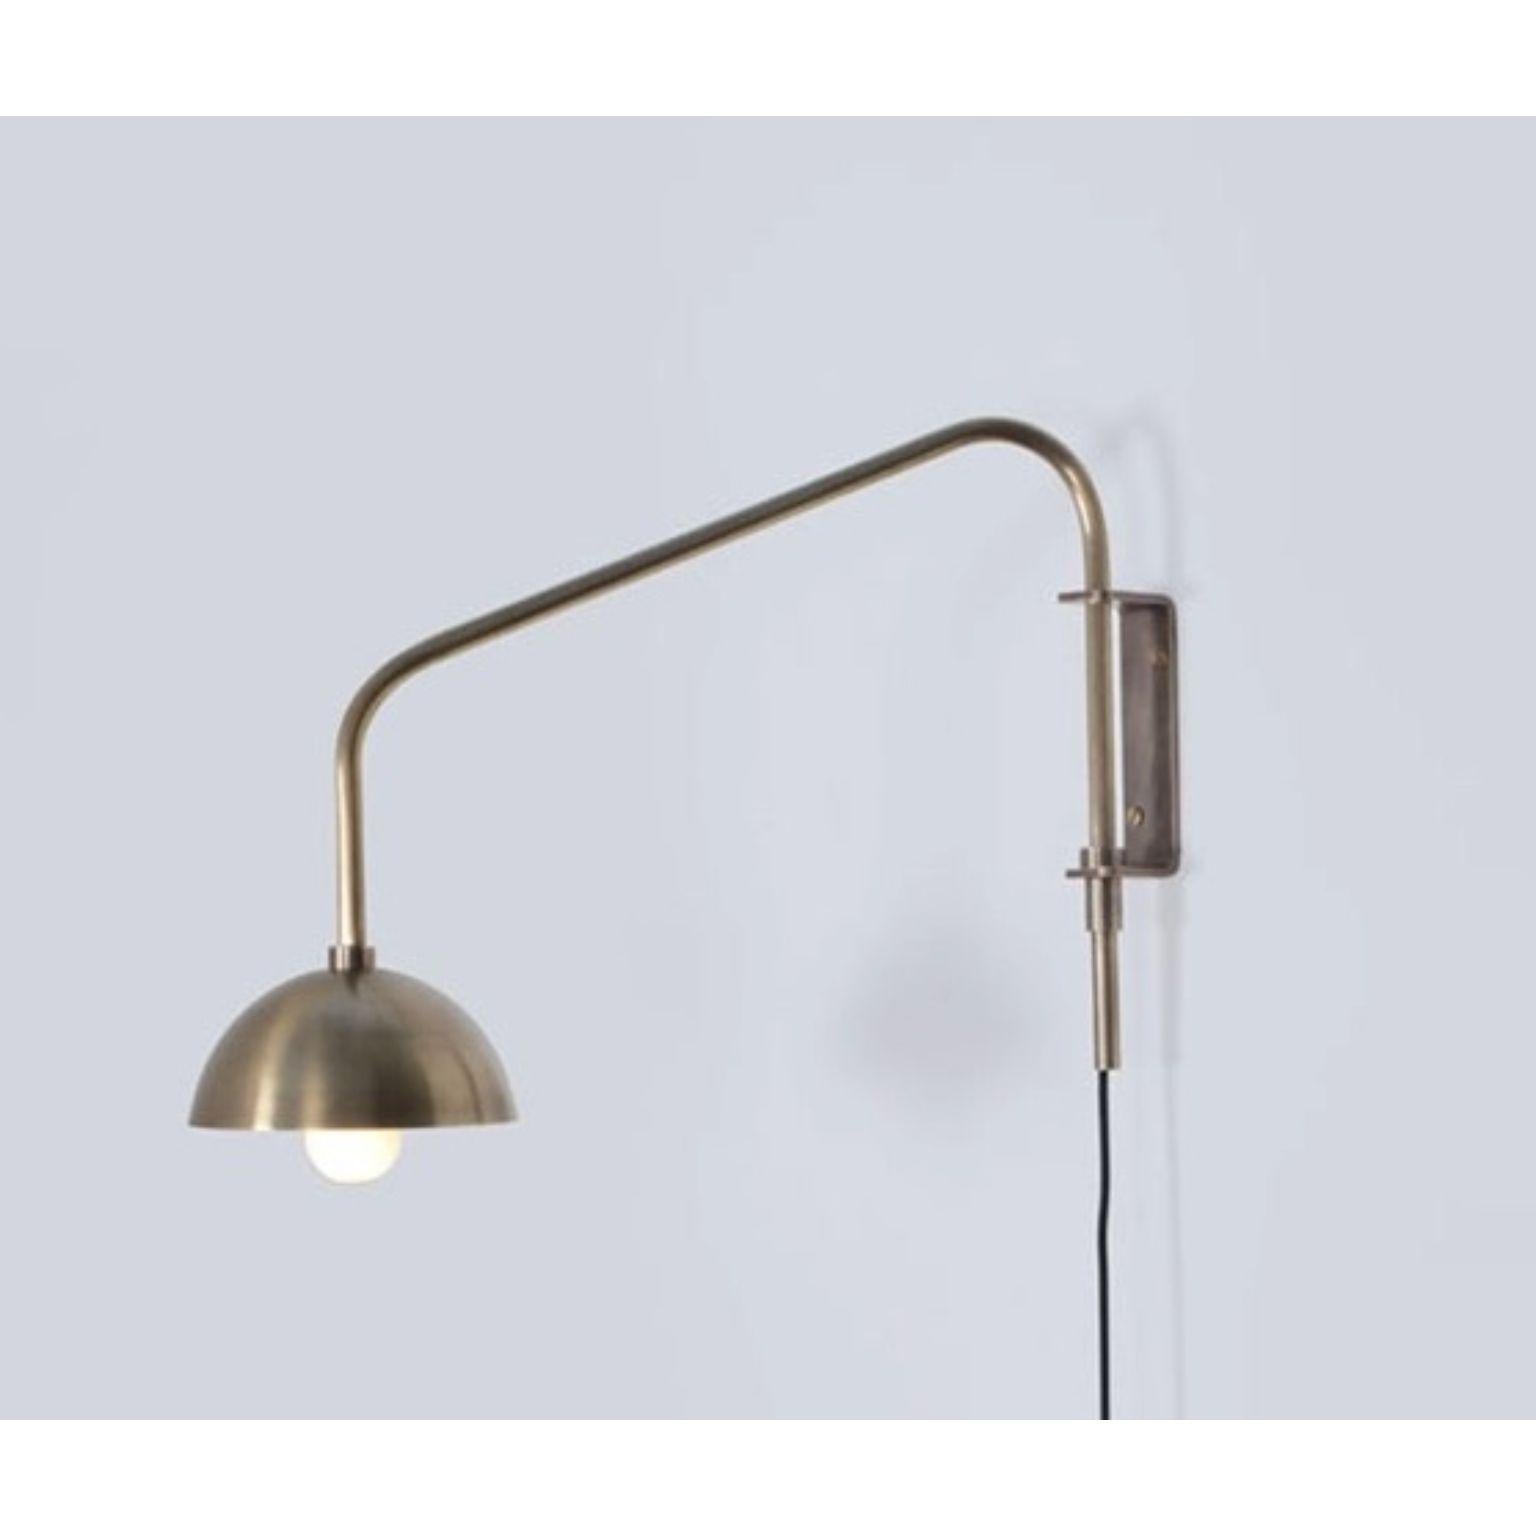 Float One Arm Brass Dome Wall Sconce by Lamp Shaper
Dimensions: D 79 x W 43 x H 34.5 cm.
Materials: Brass.

Different finishes available: raw brass, aged brass, burnt brass and brushed brass Please contact us.

All our lamps can be wired according